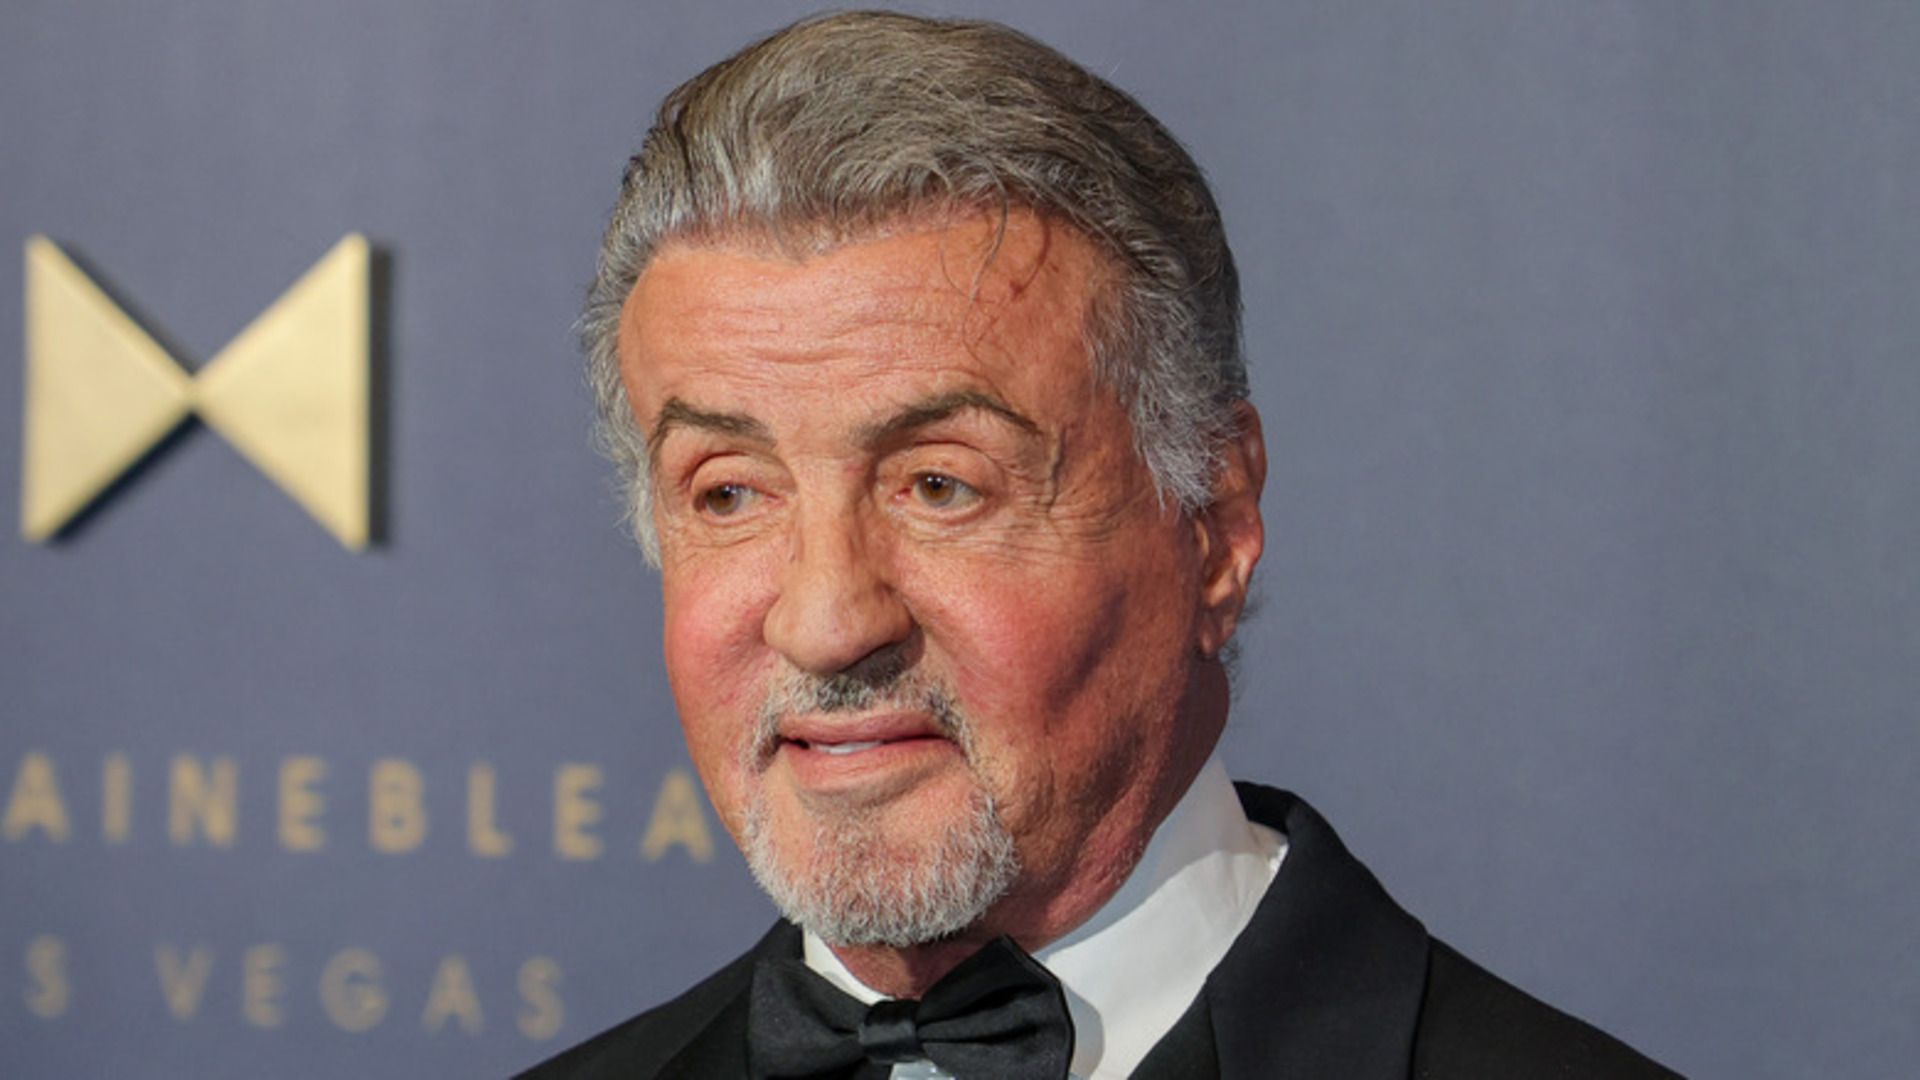 Stallone Recalls Injury He Suffered Filming ‘The Expendables’